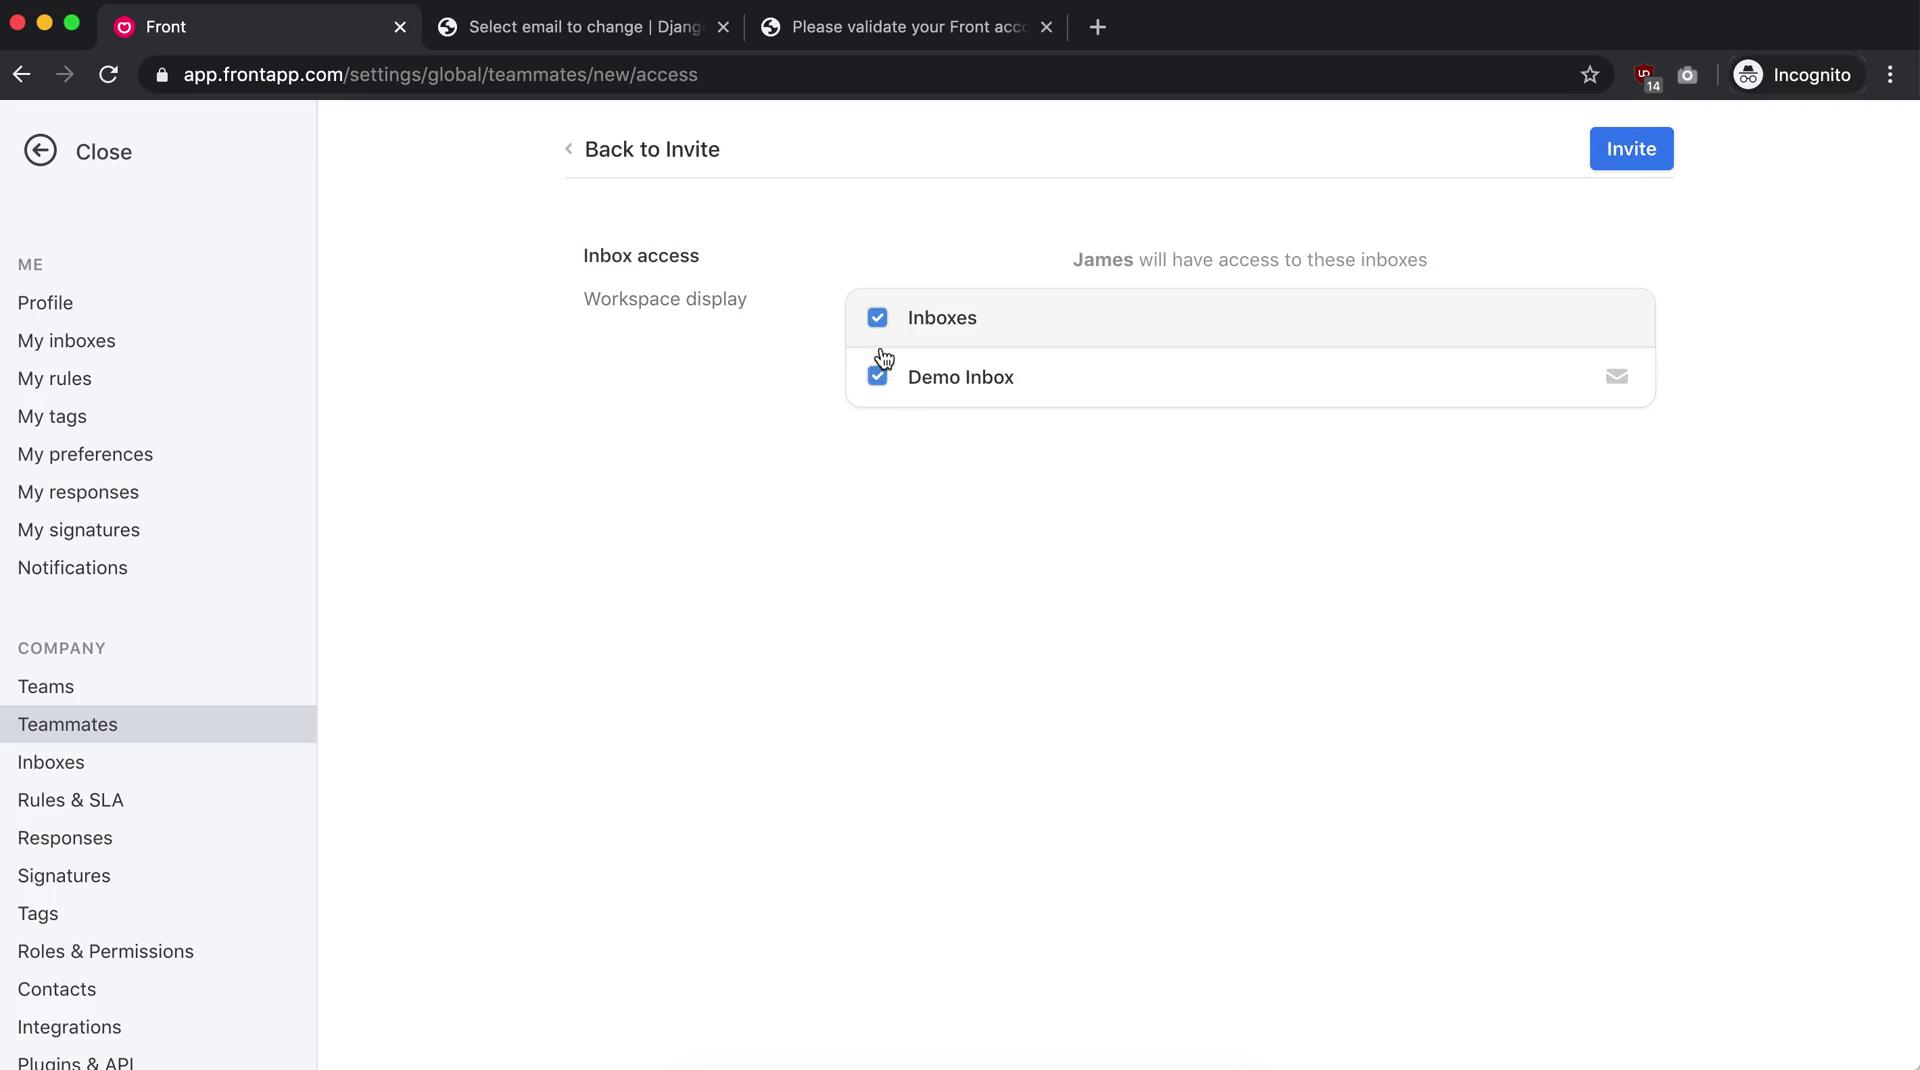 Screenshot of Set inbox access during Inviting people on Front user flow